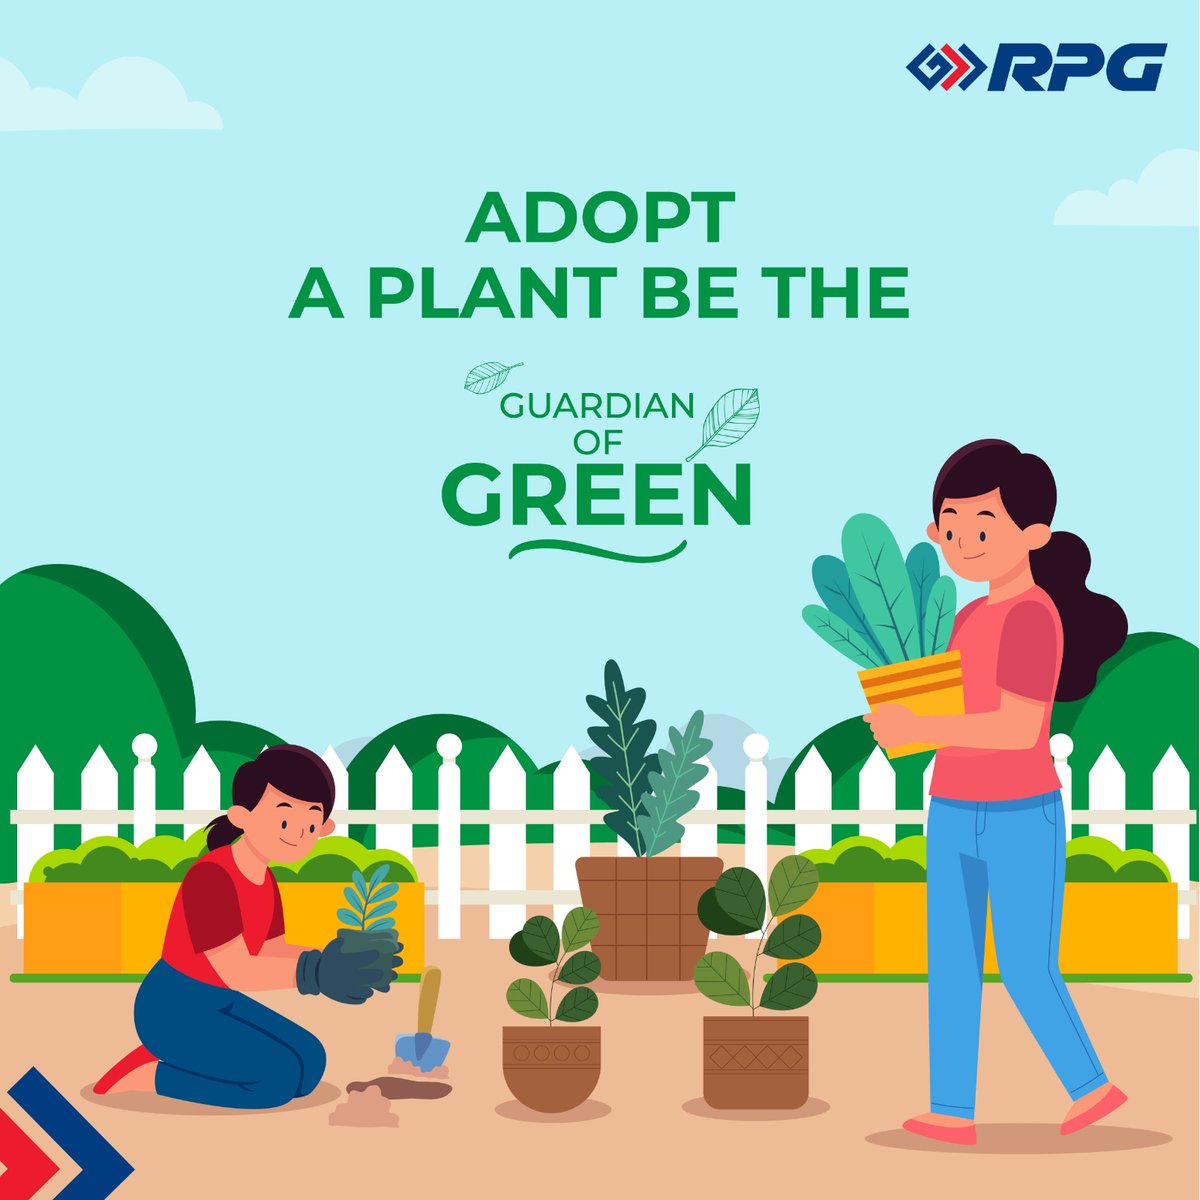 Become the Guardian of Green by adopting a plant. Snap a selfie with your plant using the hashtag #GuardianOfGreen and share it with us for a chance to get featured on our page. Let's grow together and make a difference on Earth! #ThisIsRPG #EarthDay #Green #EarthDay2024